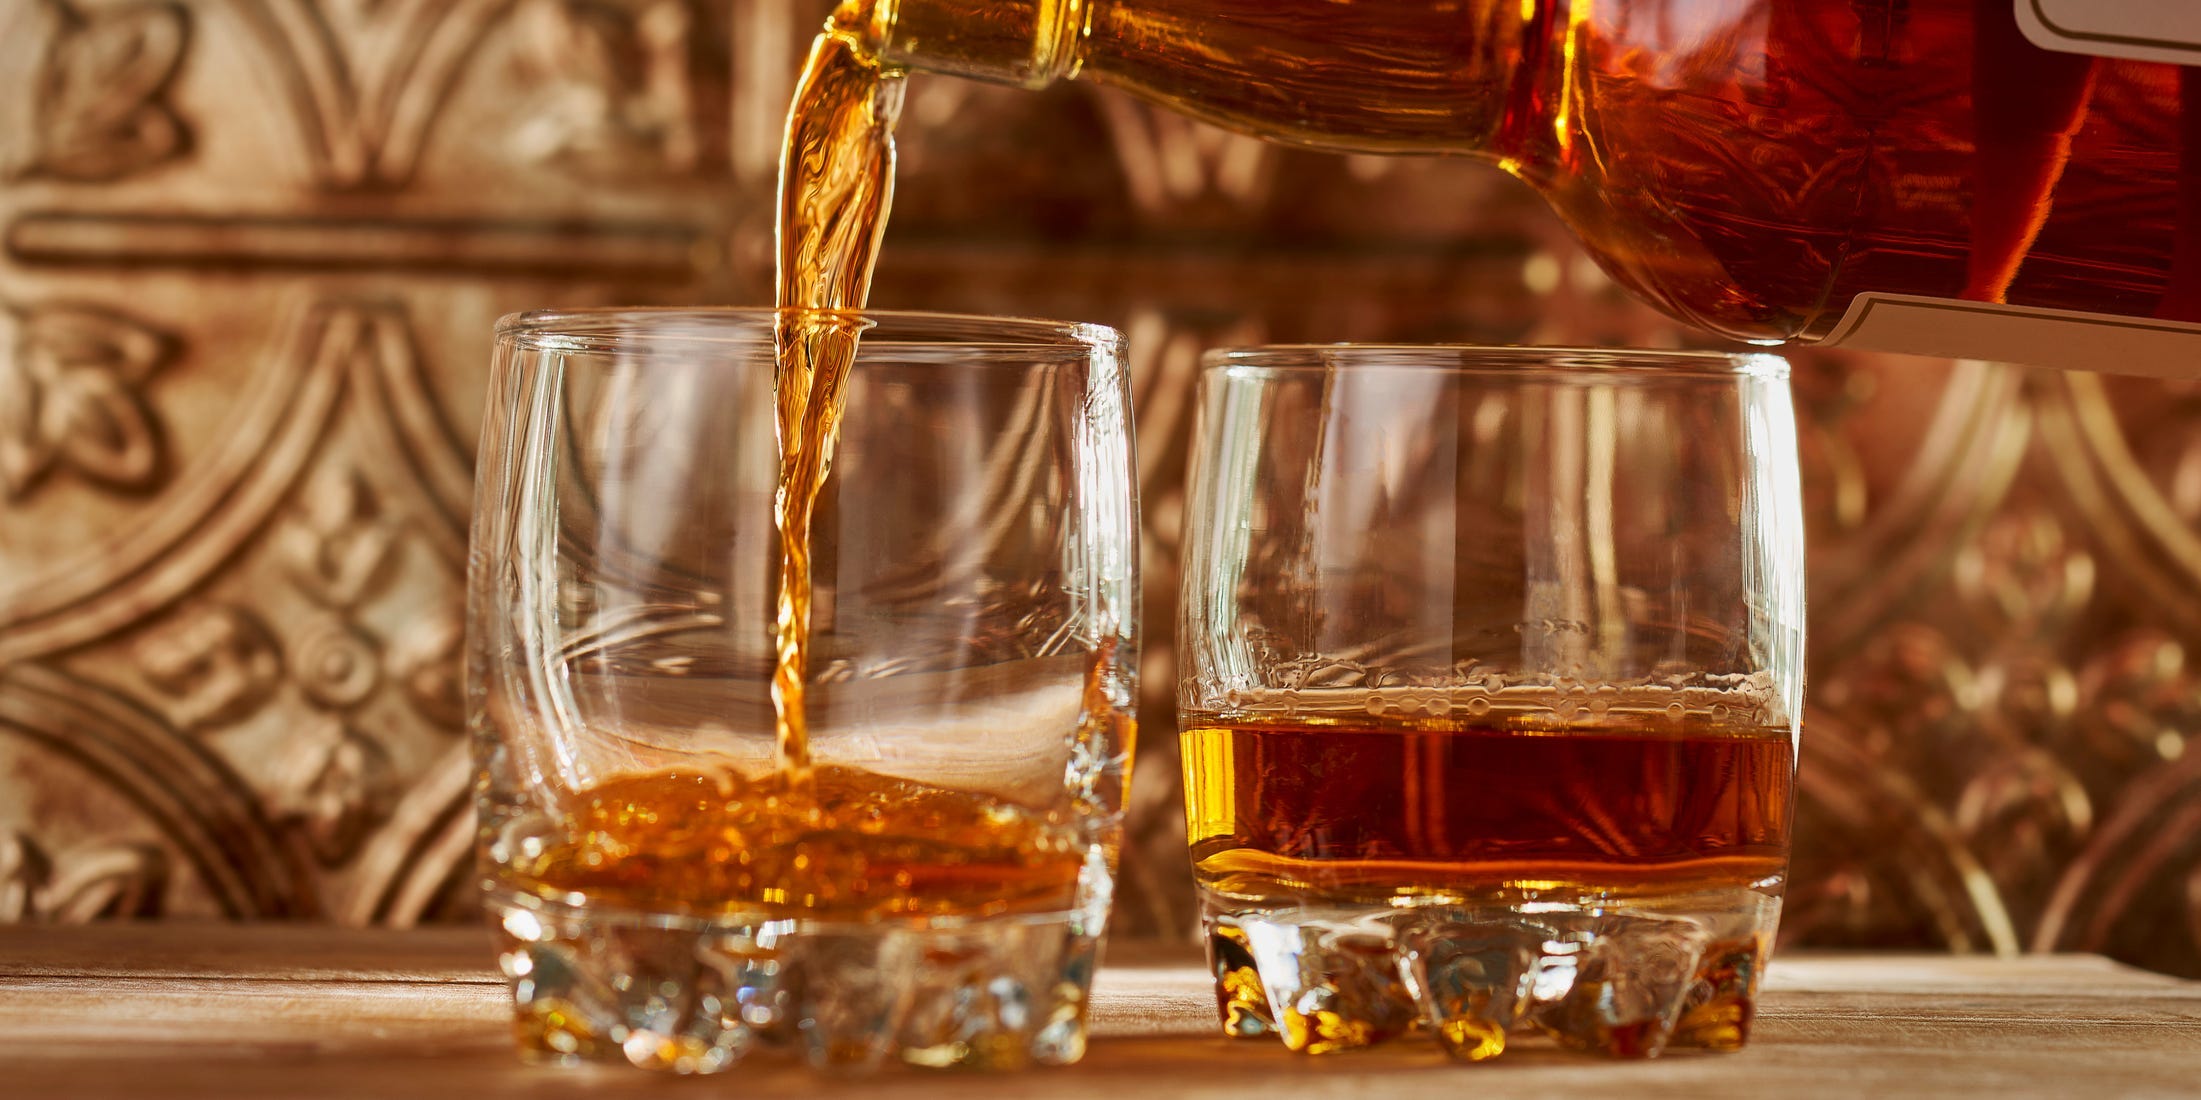 Whiskey being poured into two rocks glasses on a bar